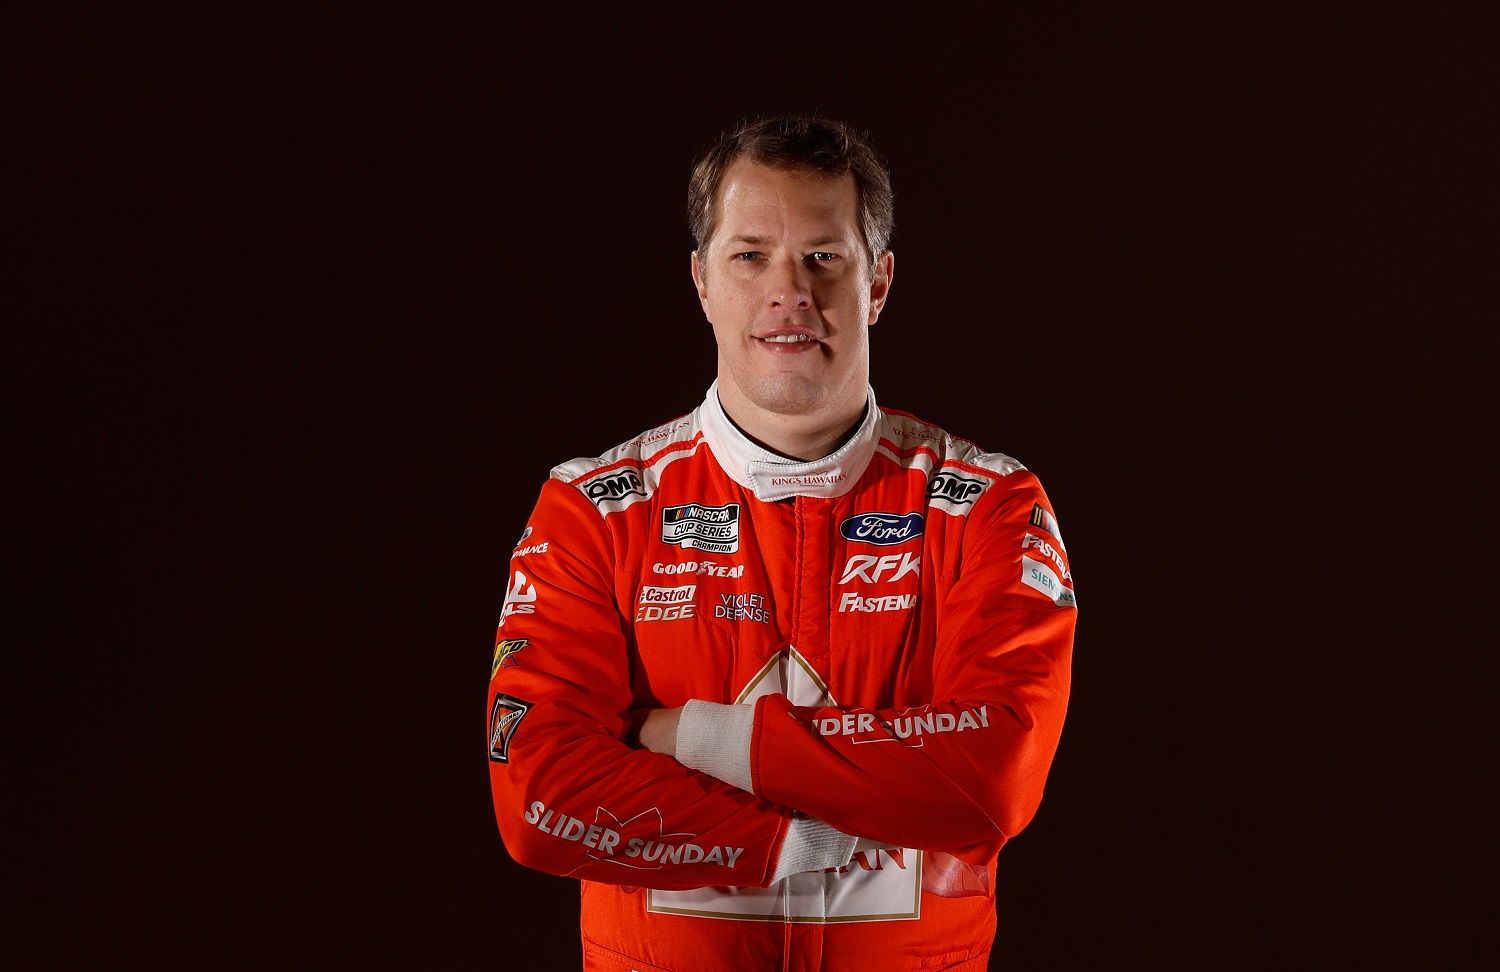 Driver Brad Keselowski poses for a photo during NASCAR Production Days at Charlotte Convention Center on Jan. 18, 2023.